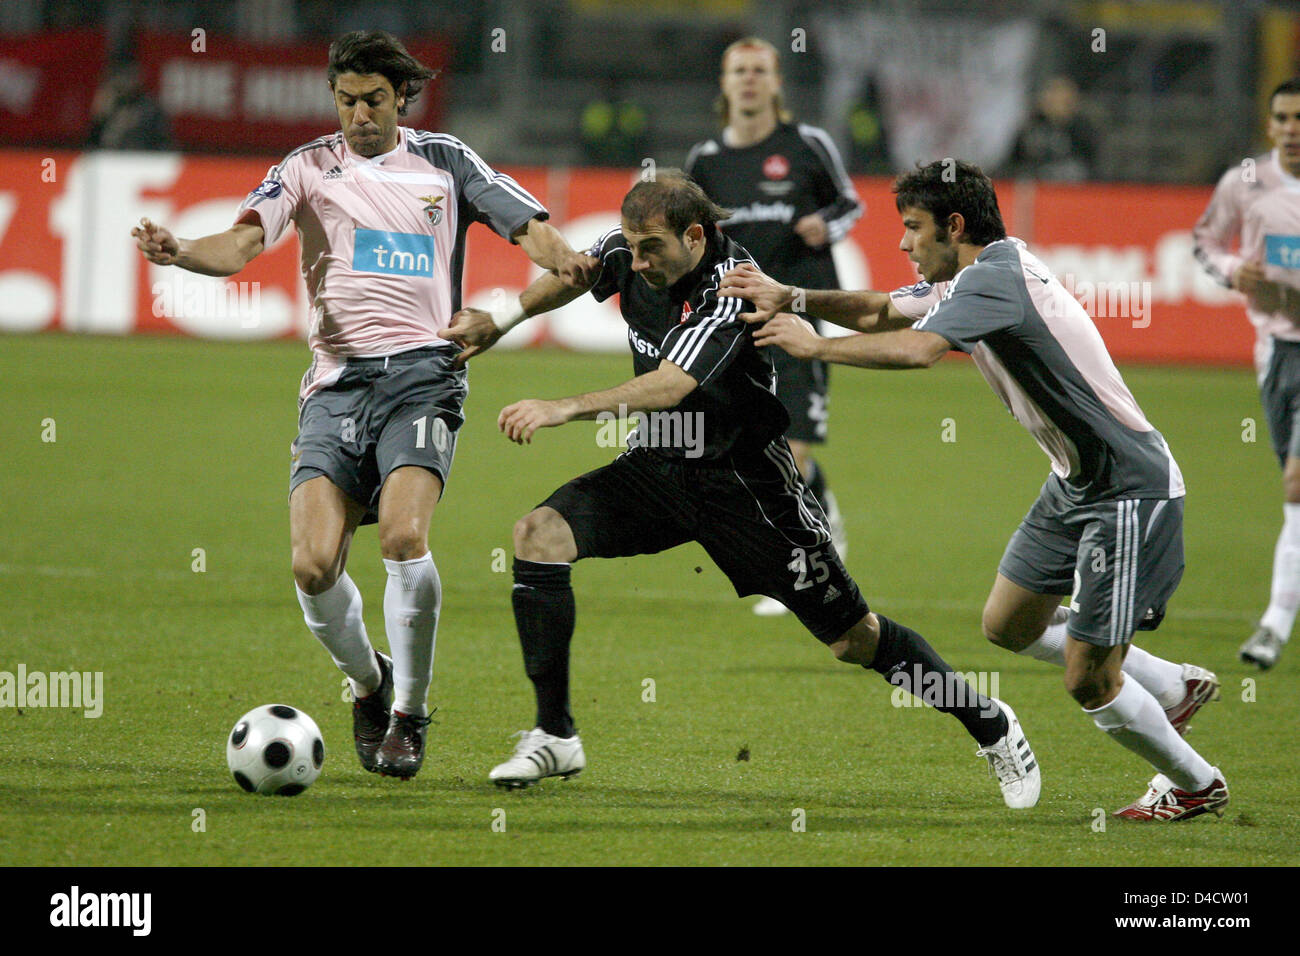 Nuremberg's Javier Horacio Pinola (C), Lisbon's Rui Costa (L) and Luis Filipe vie for the ball in the UEFA Cup round of last 32 second leg match FC Nuremberg vs Benfica Lisbon at EasyCredit Stadium, Nuremberg, Germany, 21 February 2008. The match ended in a 2-2 draw, Benfica went through to the round of last 16 on an aggregate result of 3-2. Photo: Daniel Karmann Stock Photo